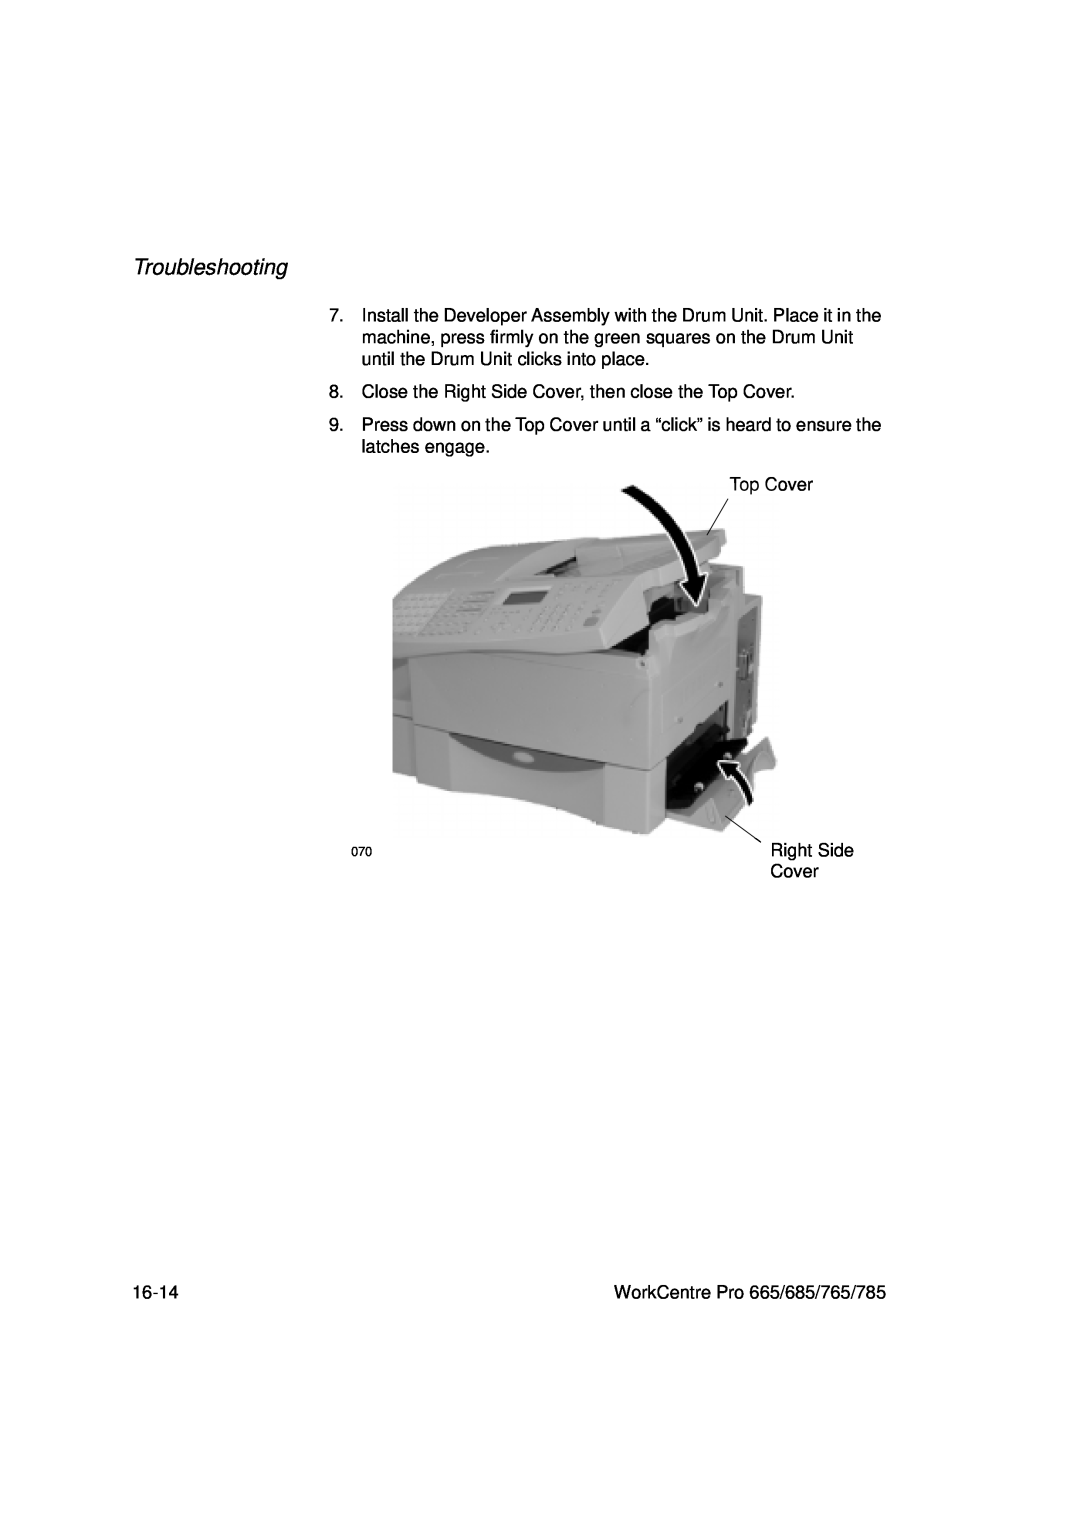 Xerox manual Troubleshooting, Top Cover, Right Side, 16-14, WorkCentre Pro 665/685/765/785 